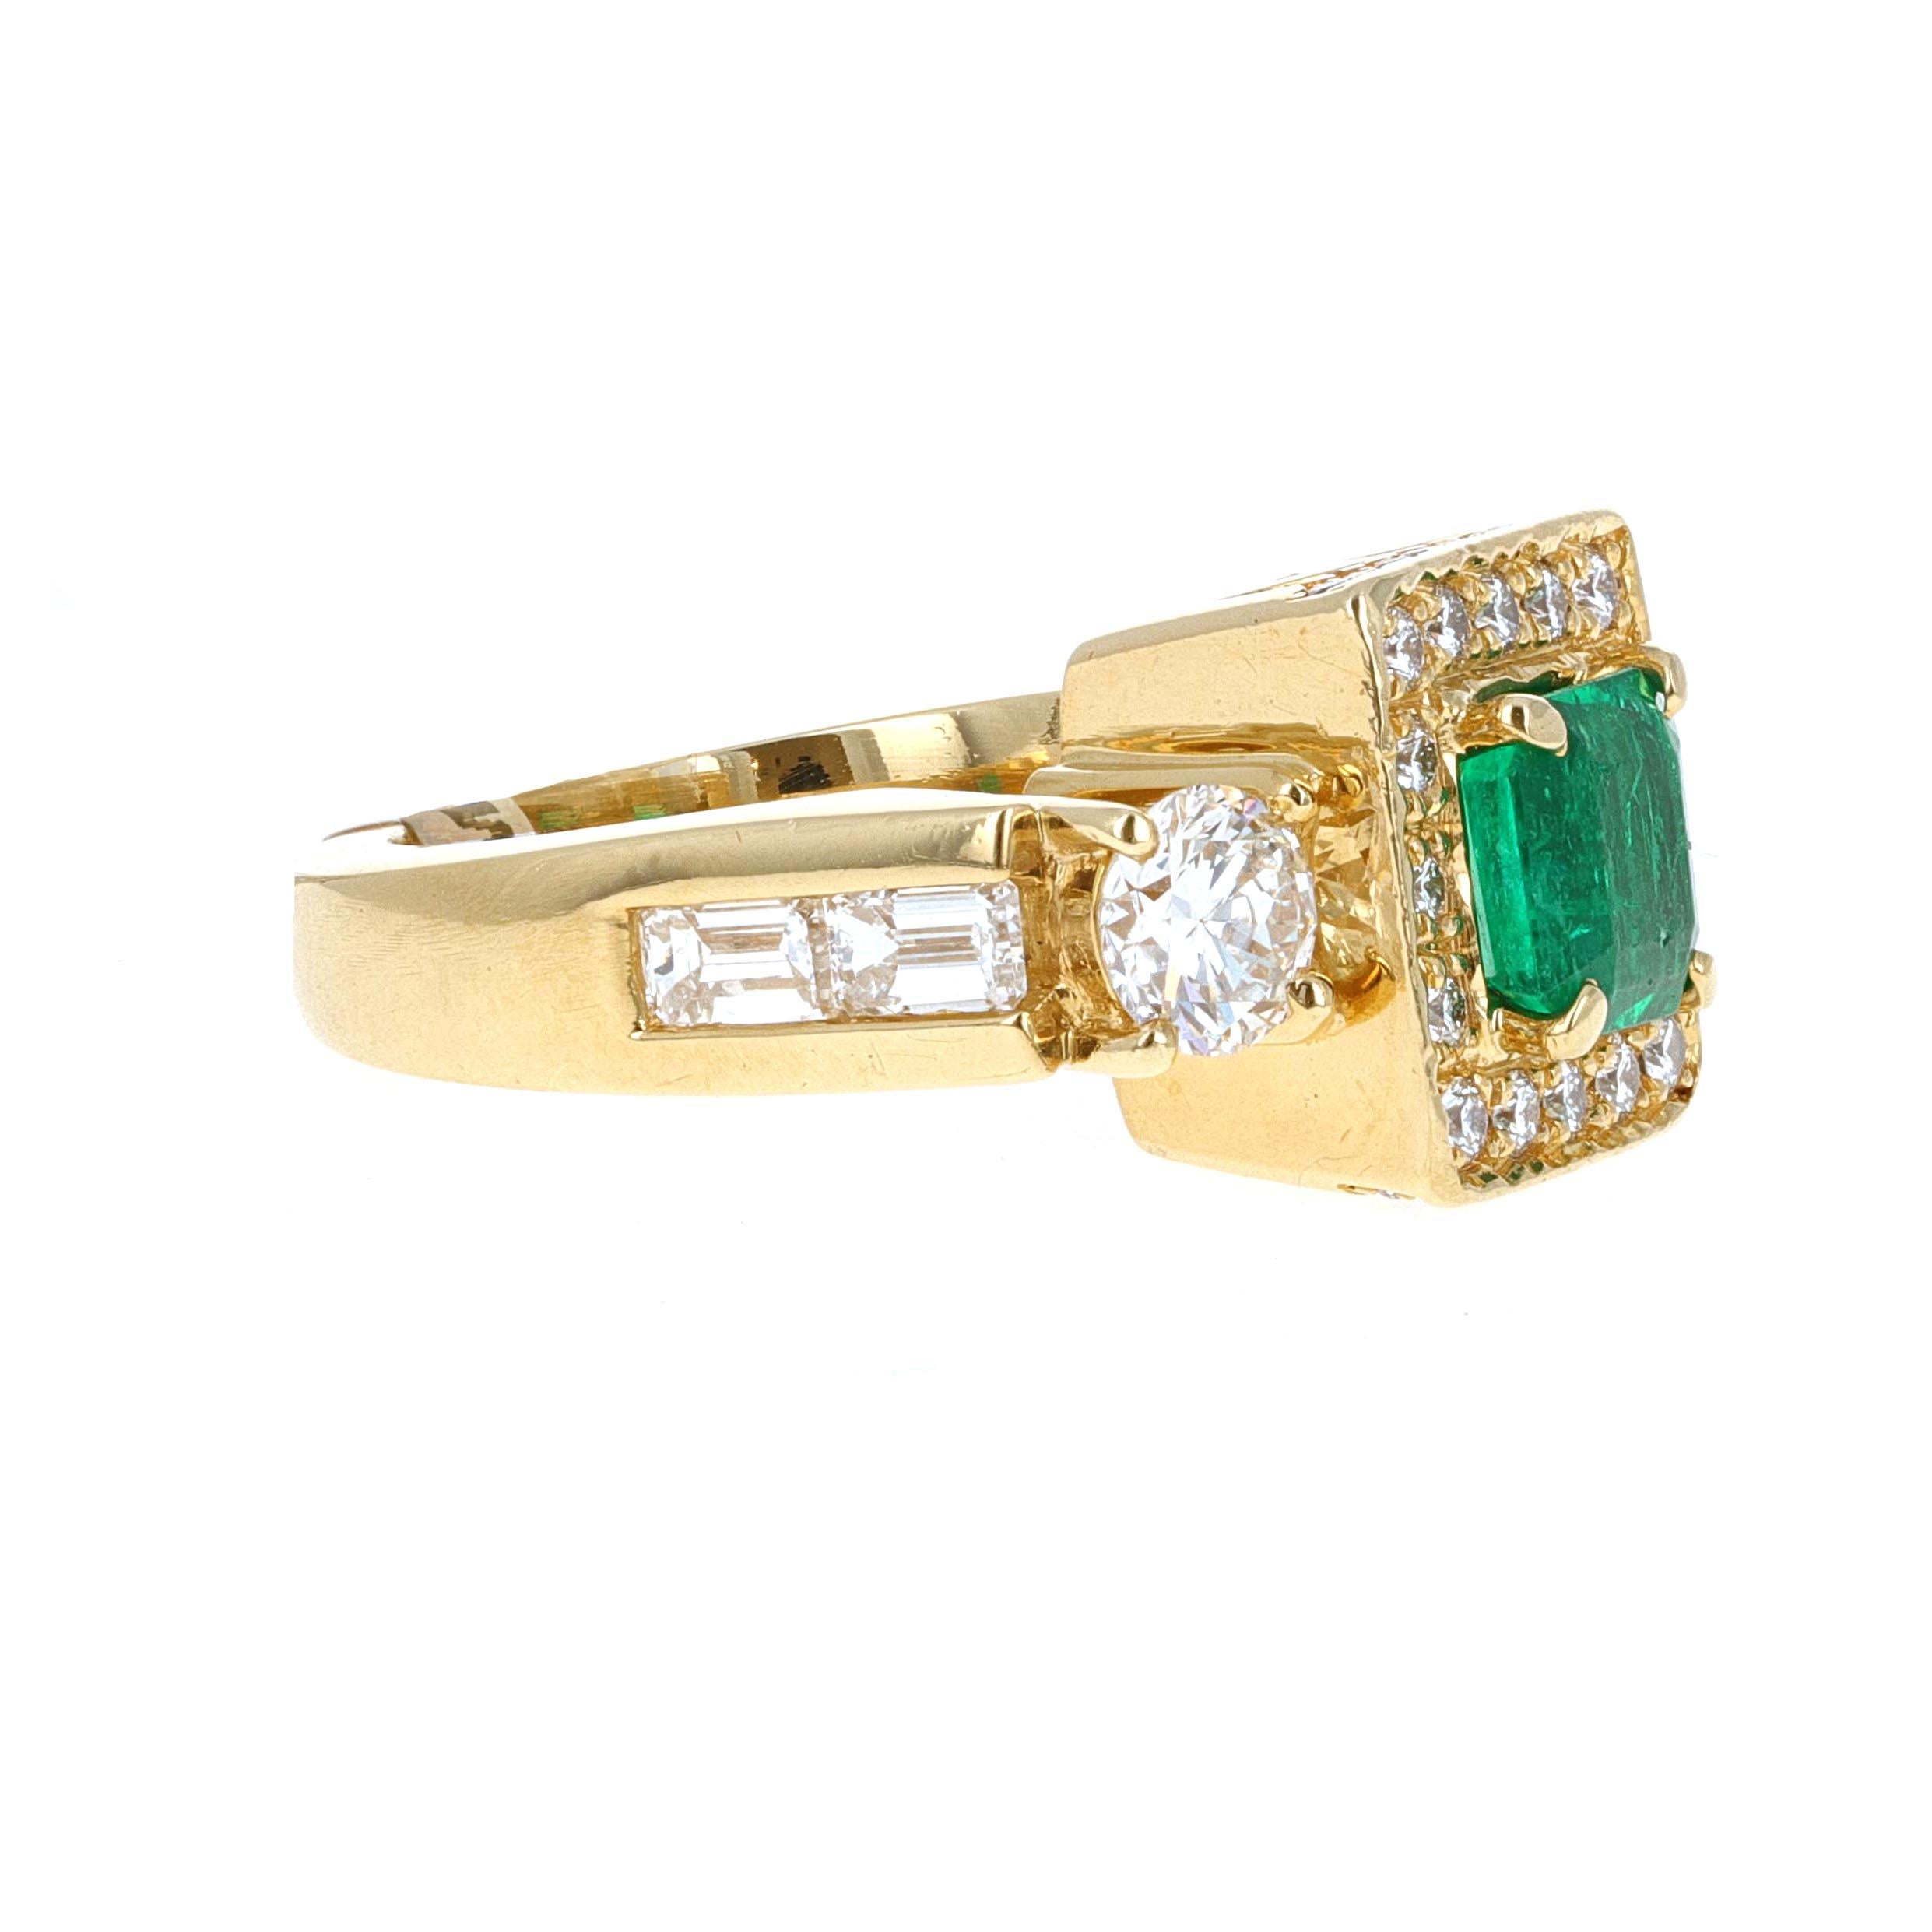 18 karat yellow gold emerald and diamond three-stone ring. The center stone is an estimated 1.30 carats, it is an emerald cut emerald. There are 32 diamonds around the center stone estimated to weigh 0.30 carats total weight. The side stones are